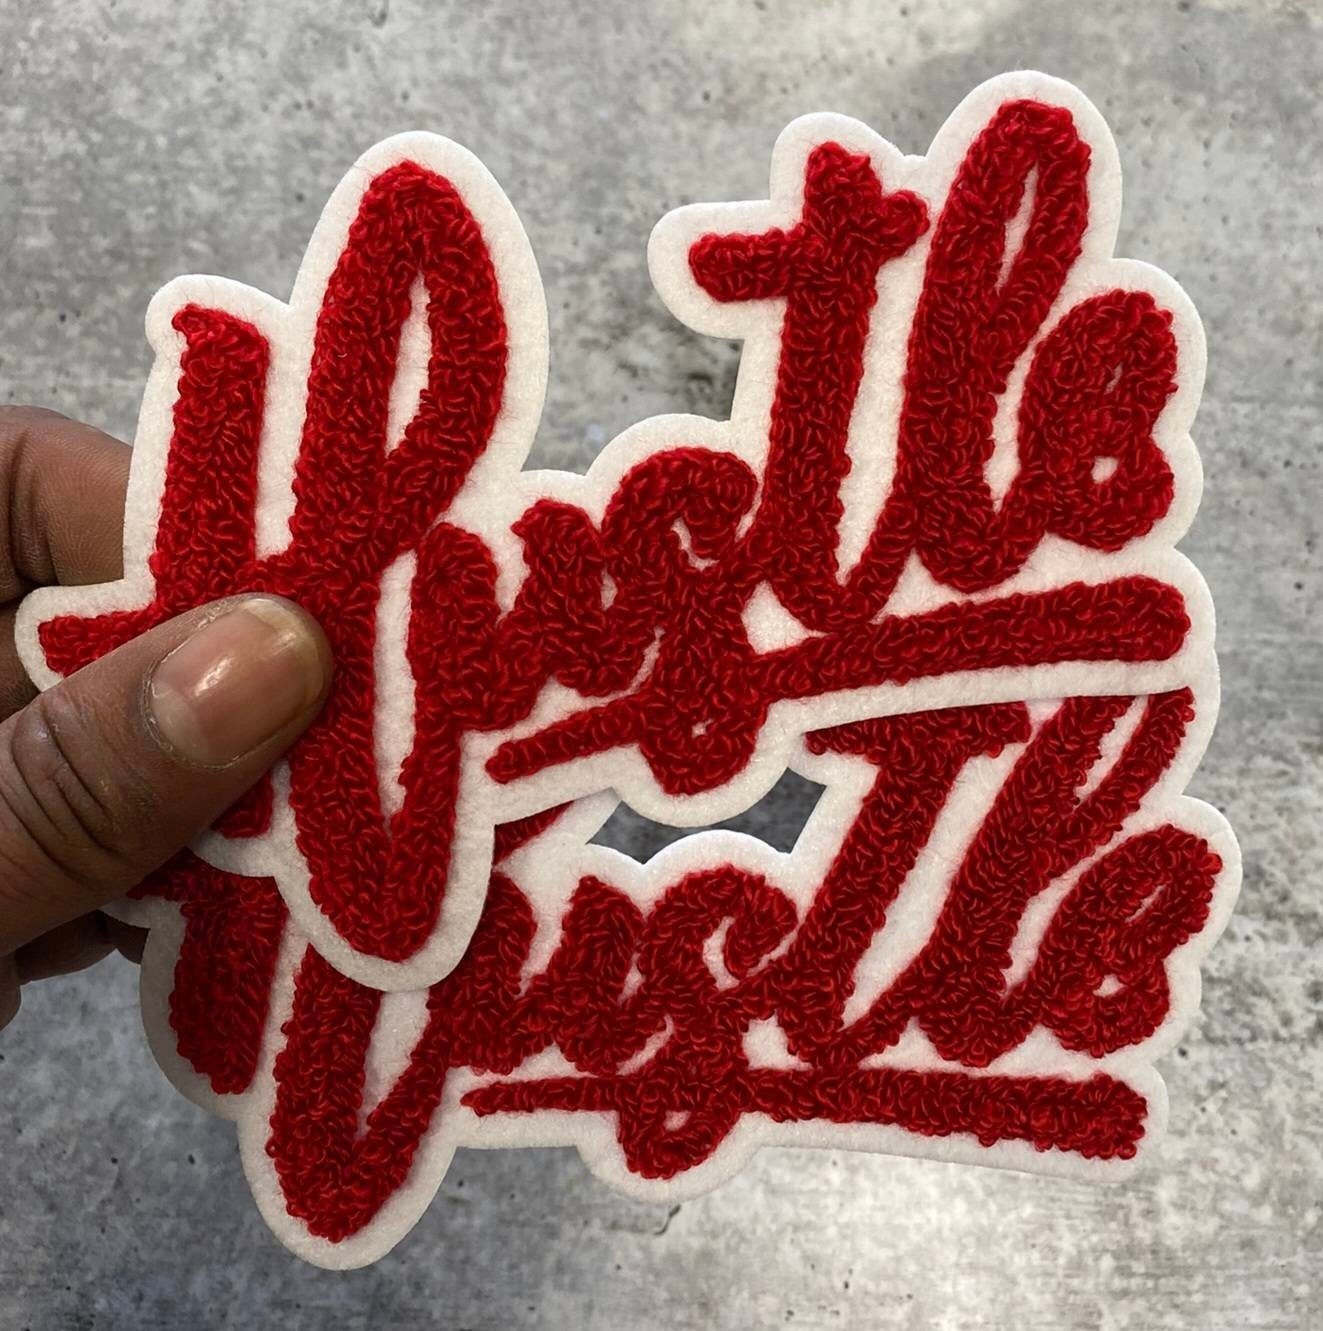 New SIZE, 1-pc Red & White "Hustle" Chenille Patch (iron-on) Size 6"x4", Varsity Patch for Denim, Camos, Hoodies, Small Patch